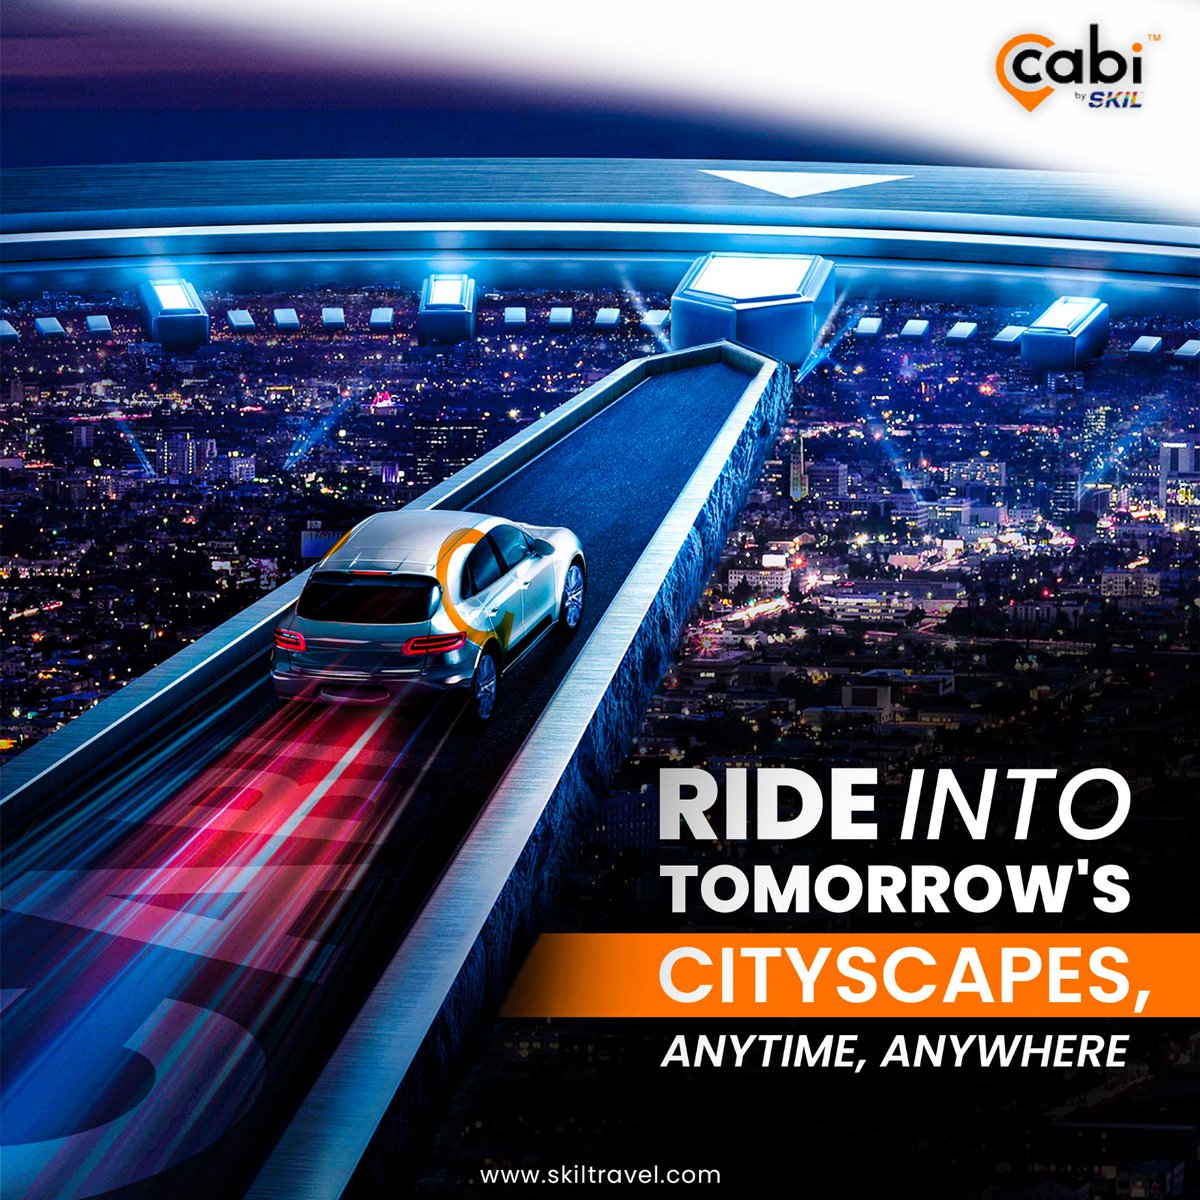 Ride into tomorrow's cityscapes with the confidence of knowing you have a safe, comfortable, and efficient transportation solution at your fingertips. 🌆 #CABI #CabibySKIL #CorporateCabServices #comfortable #supercars #bestservices #userexperience #travel #luxurycab